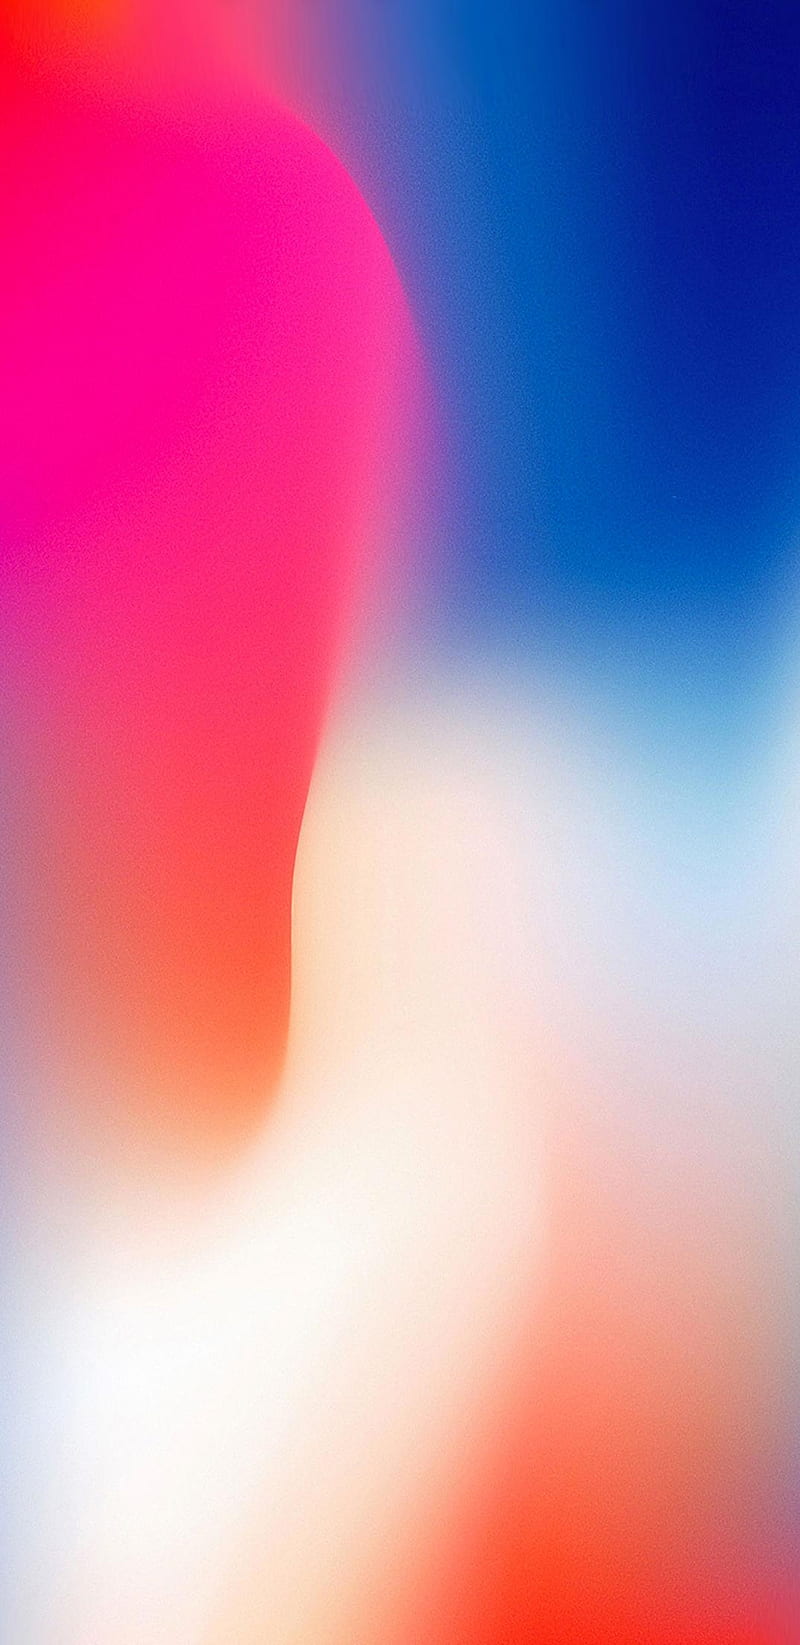 Iphone x, apple, blur, edge, infinity, official, phone, plus, stoche, style, white, HD phone wallpaper